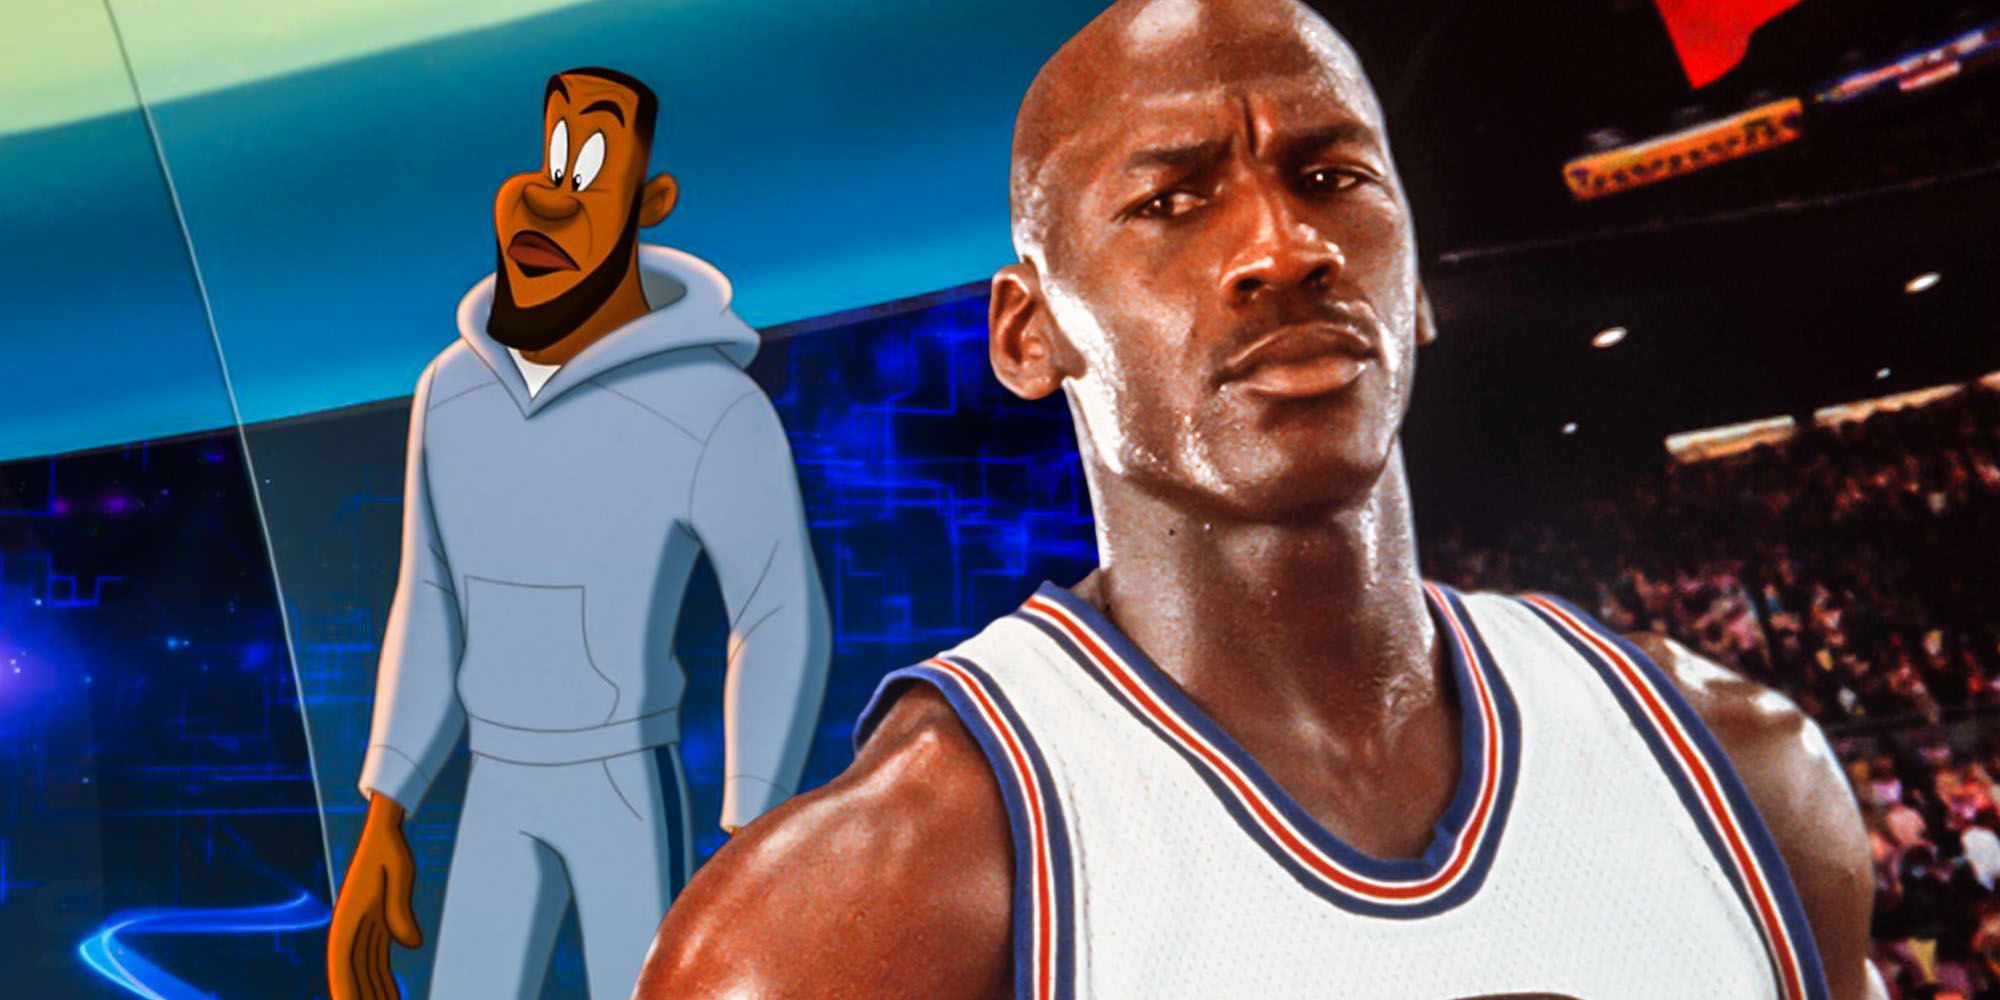 Space Jam 2: A New Legacy's most cursed moments, ranked.